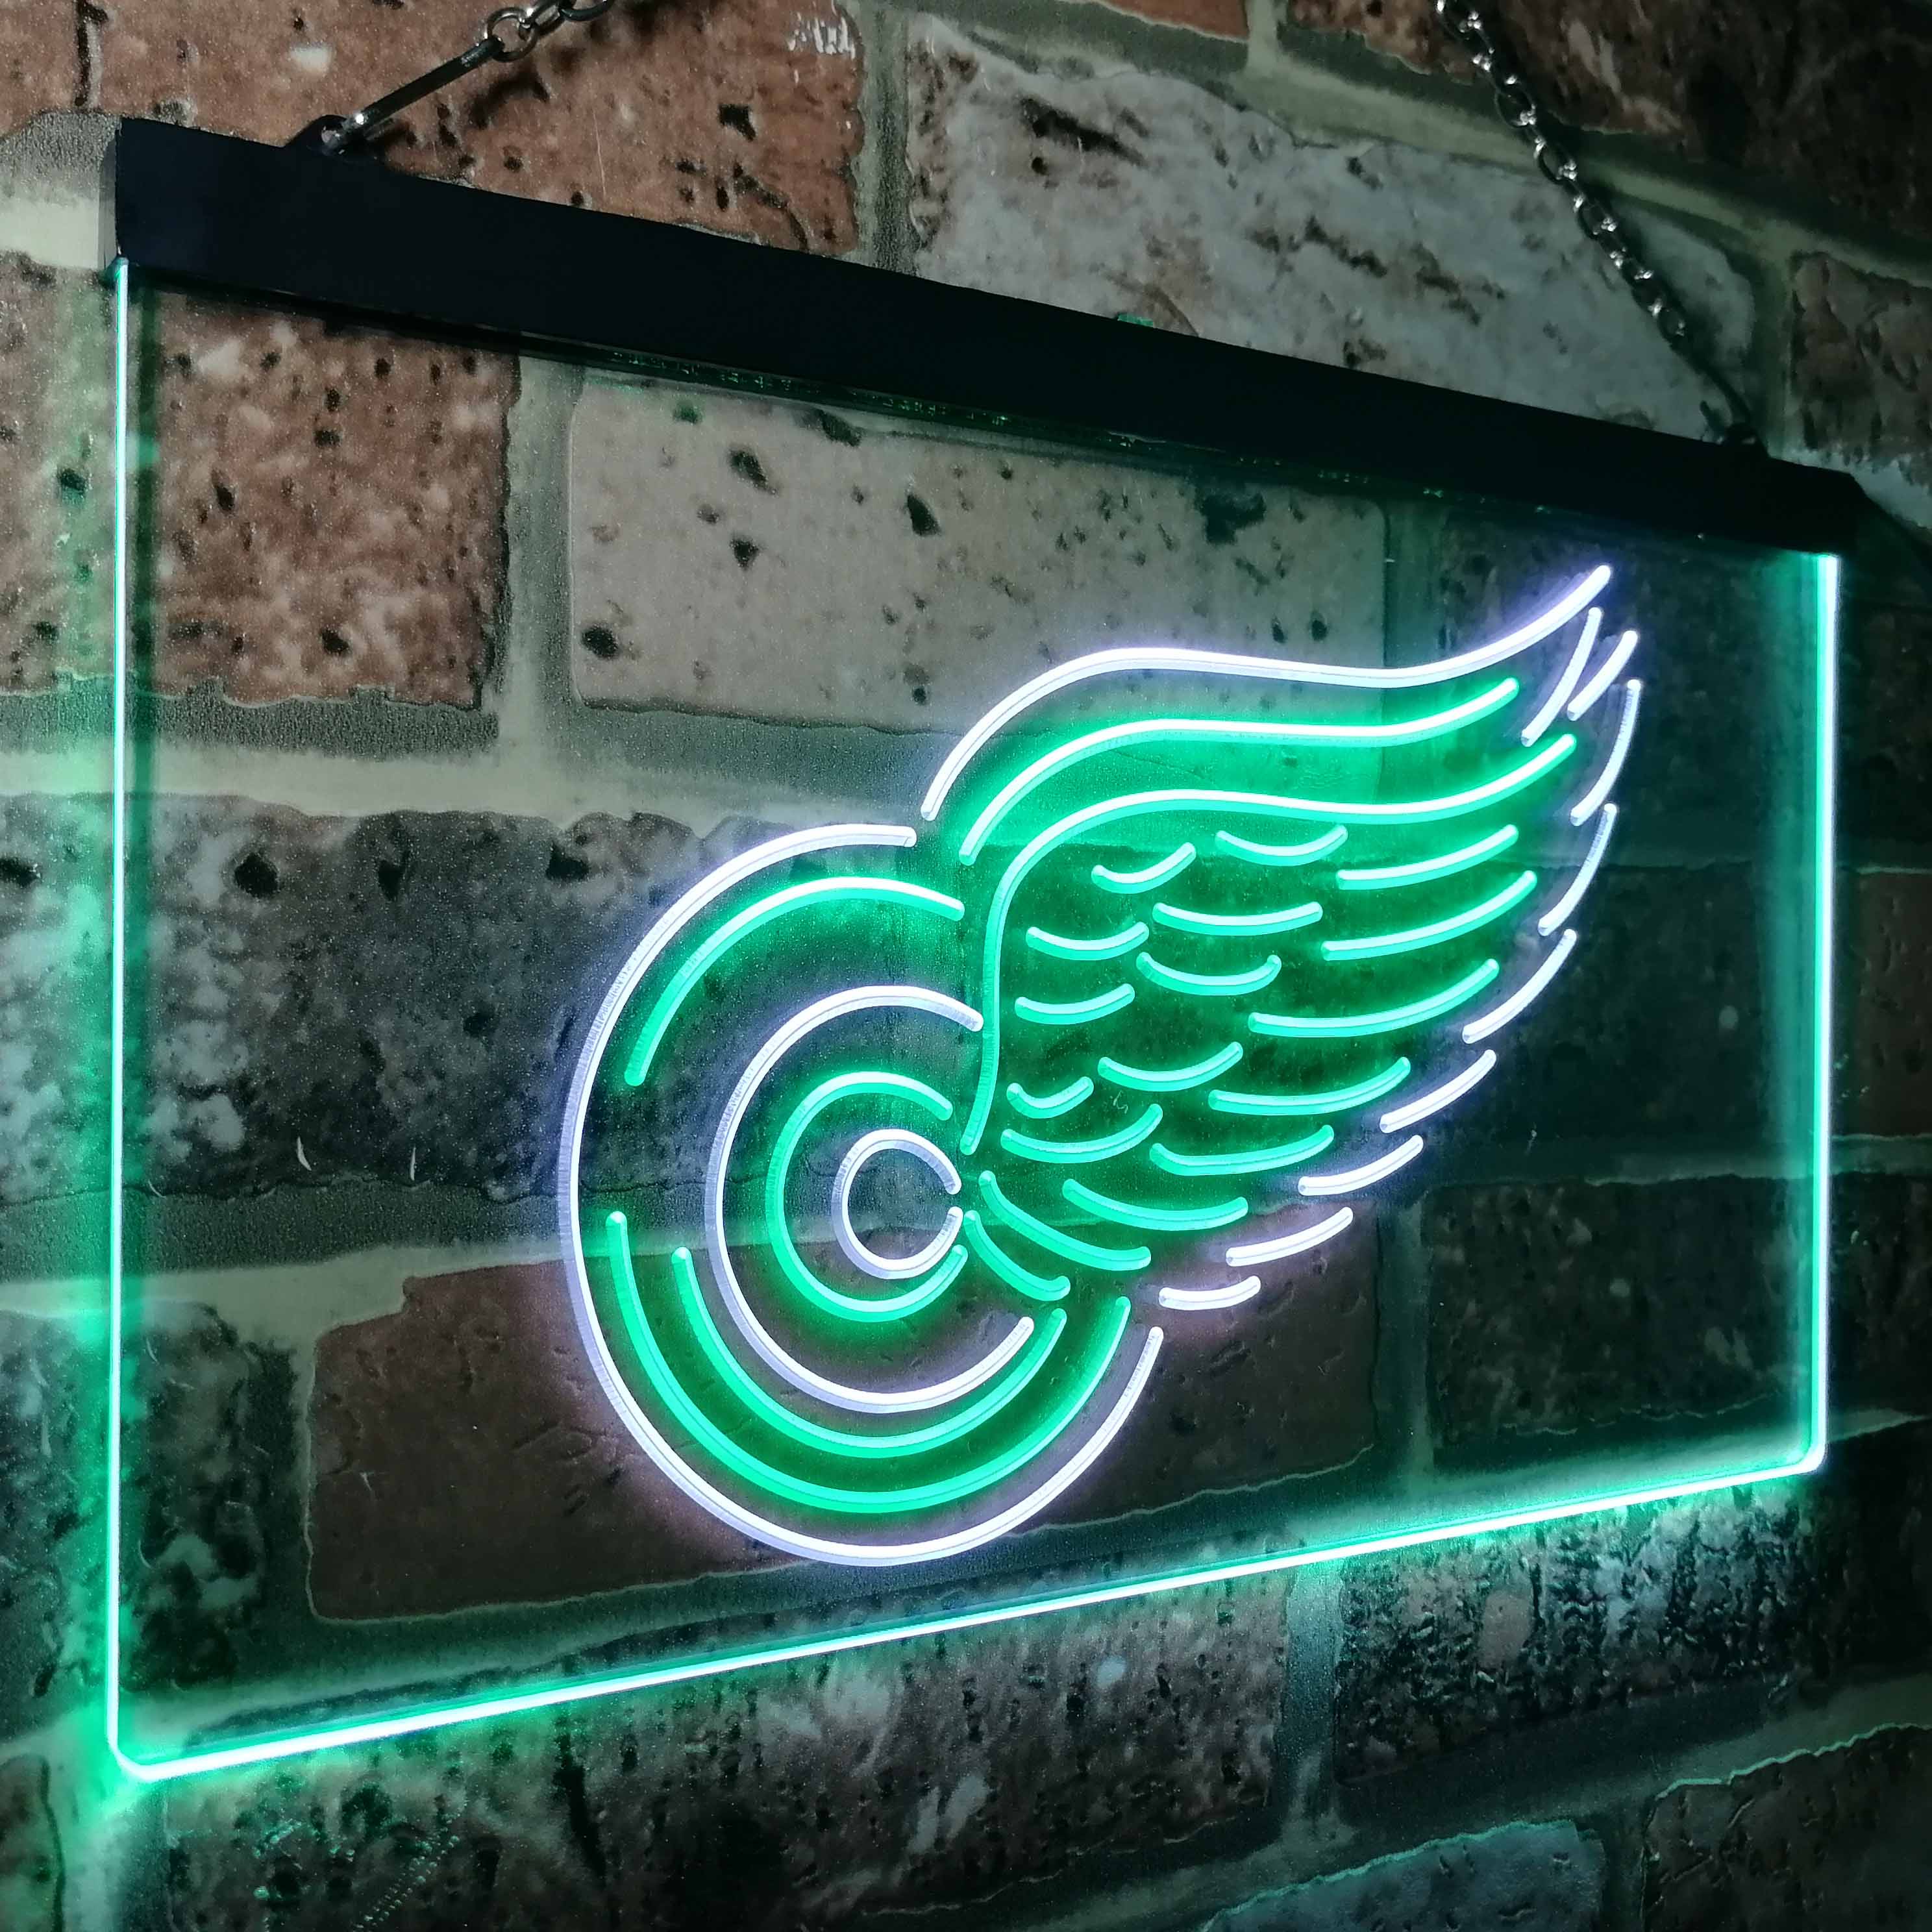 Detroit Red Wings LED Neon Sign